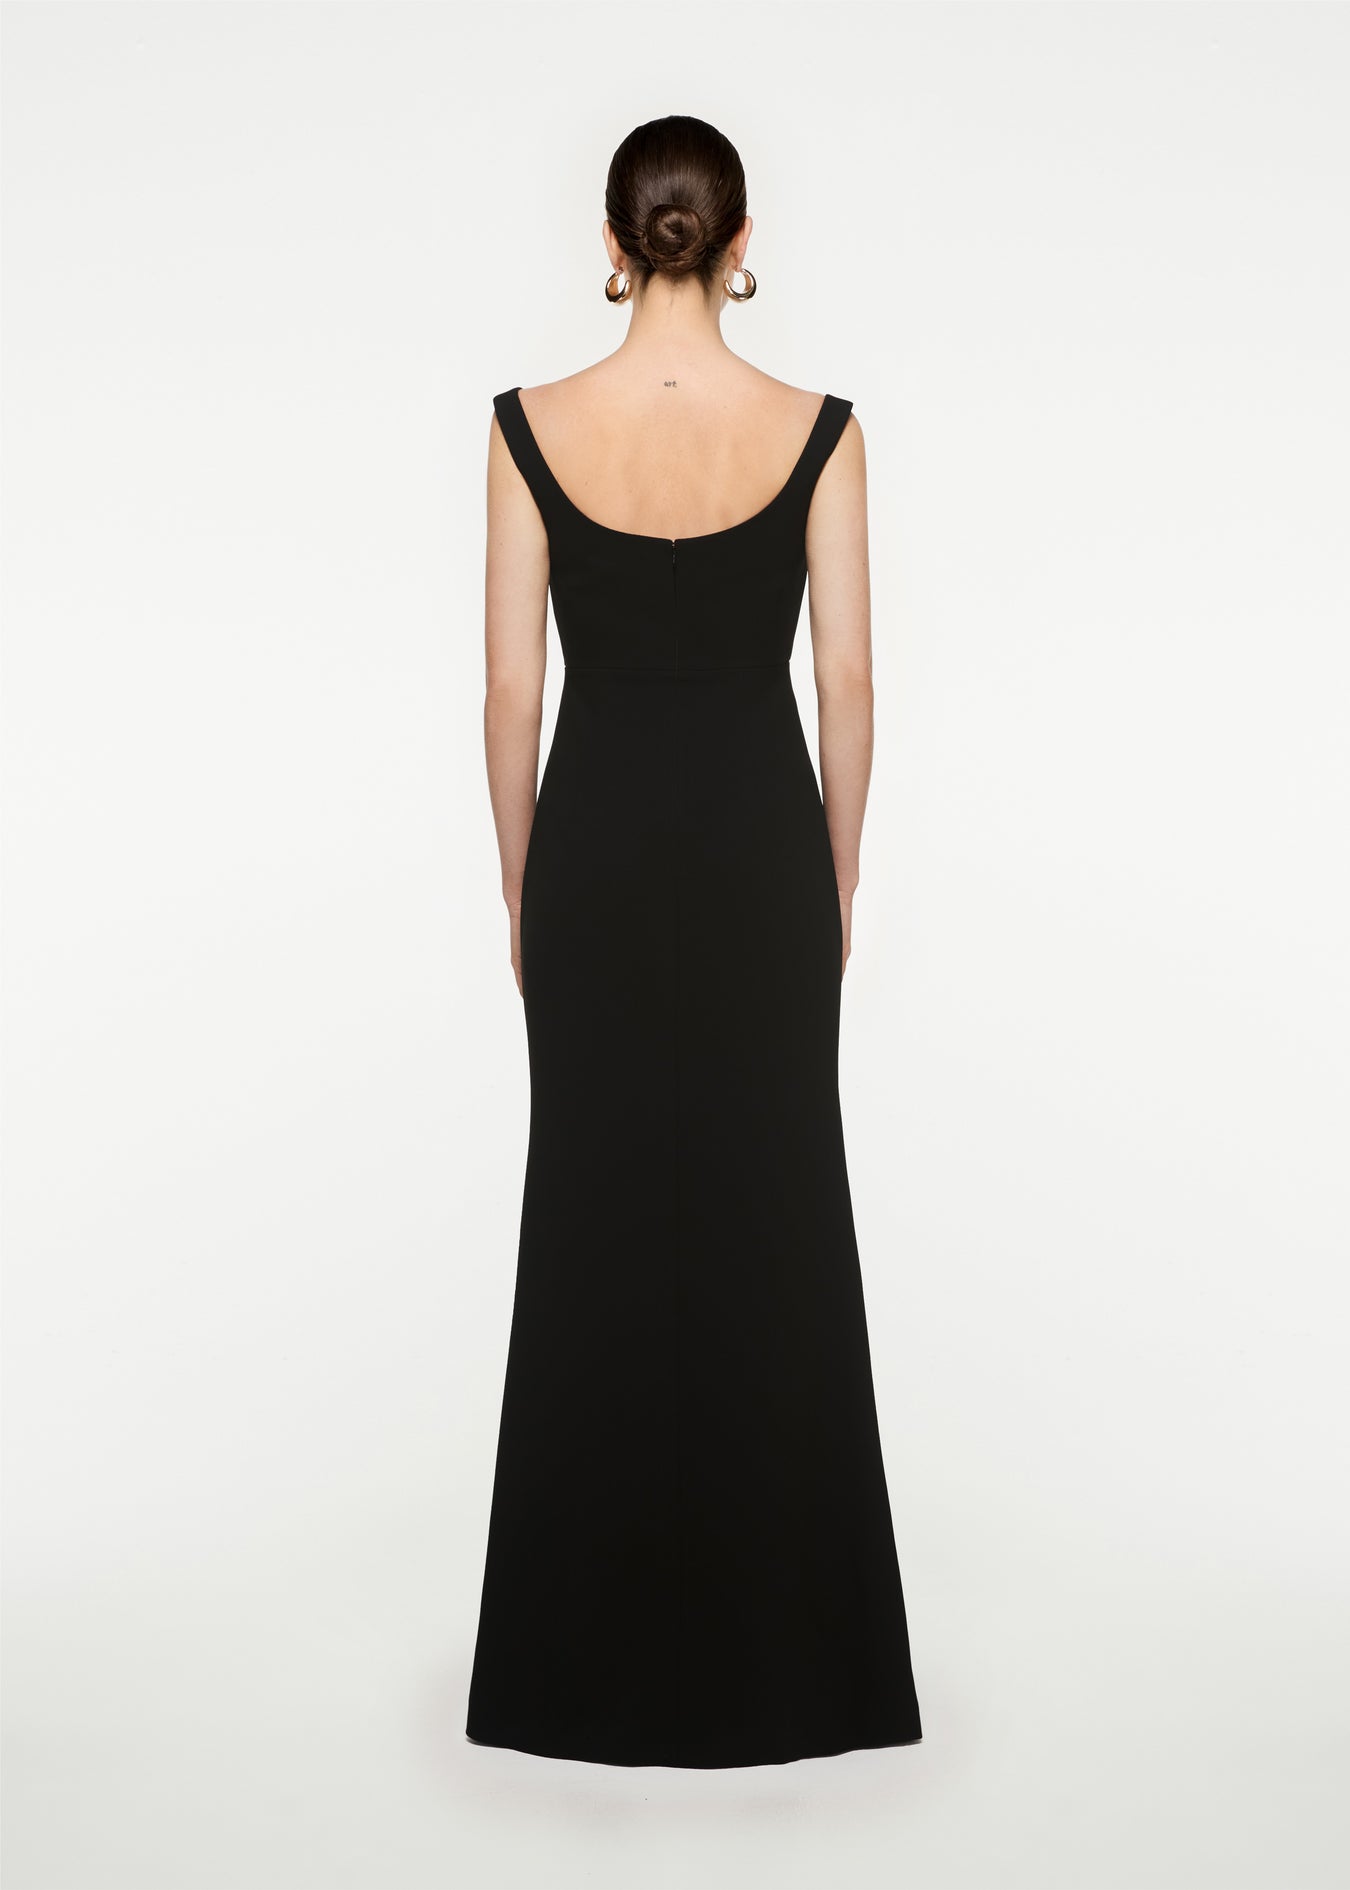 The back of a woman wearing the Off Shoulder Cady Diamante Gown in Black